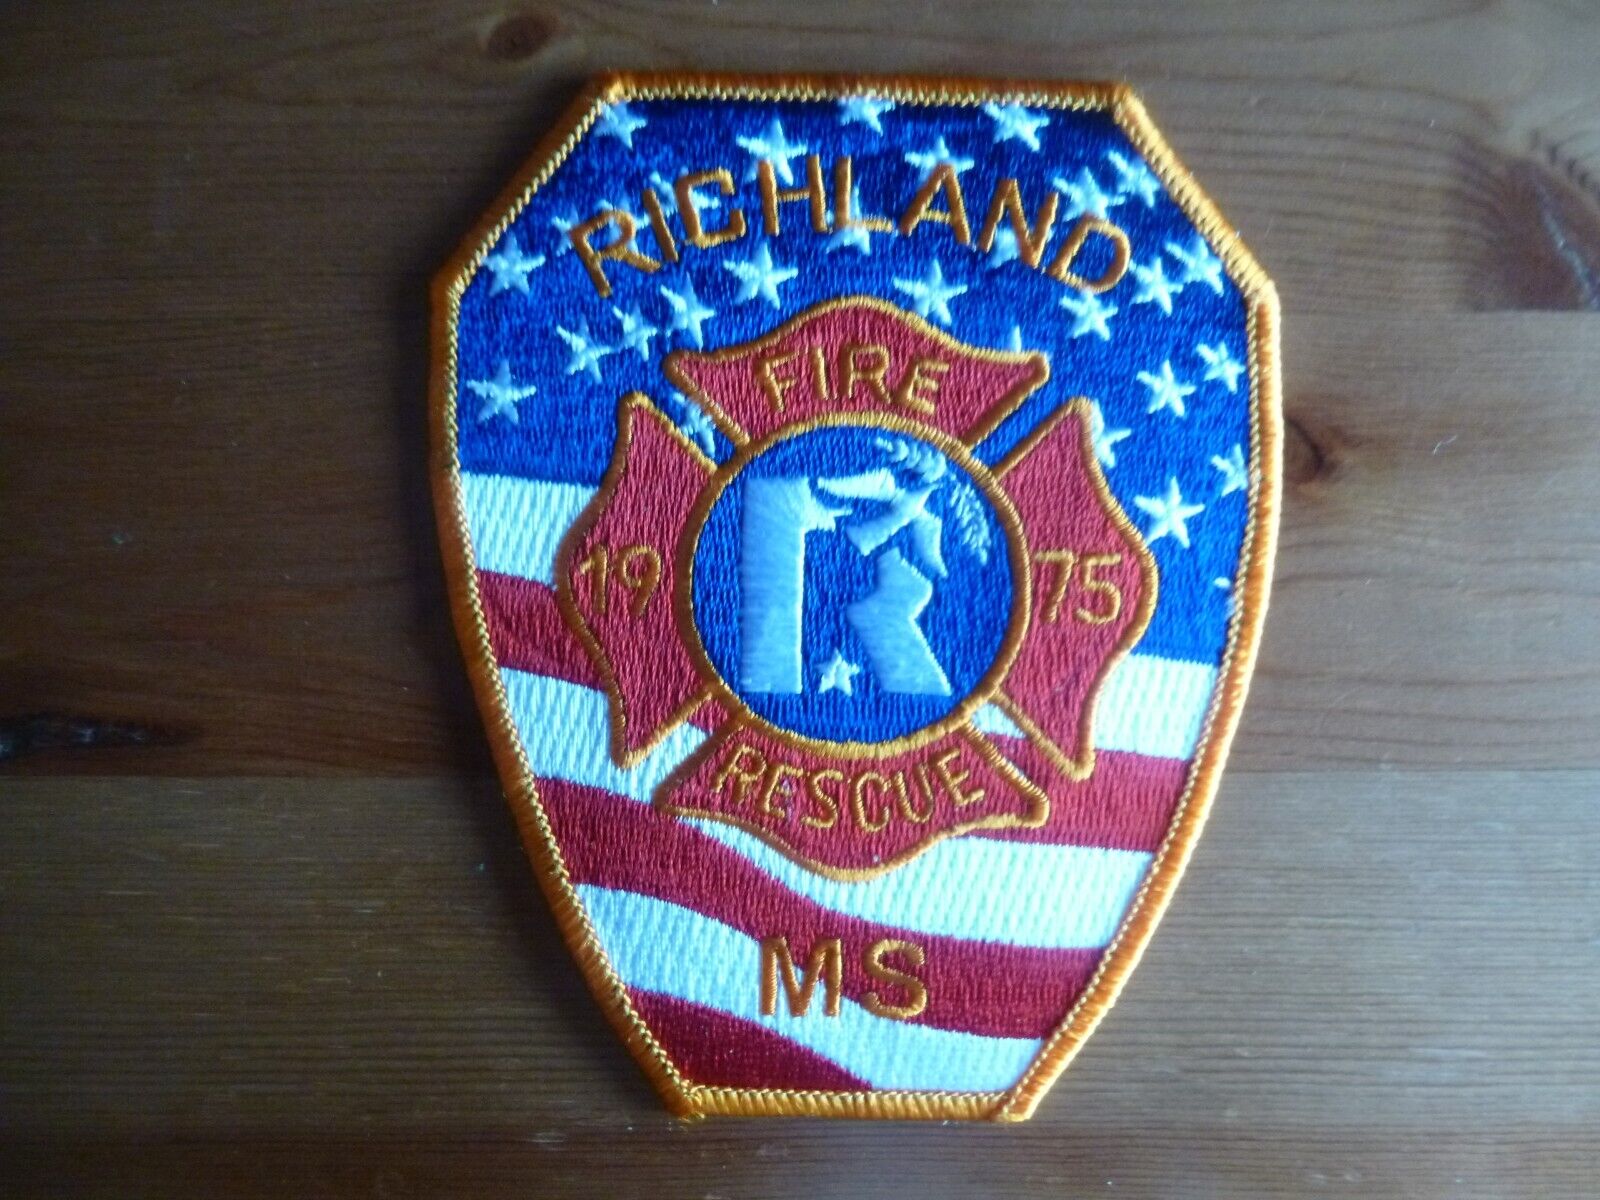 RICHLAND MS MISSISSIPPI FIRE RESCUE Patch FIREFIGHTER USA Obsolete UNIT